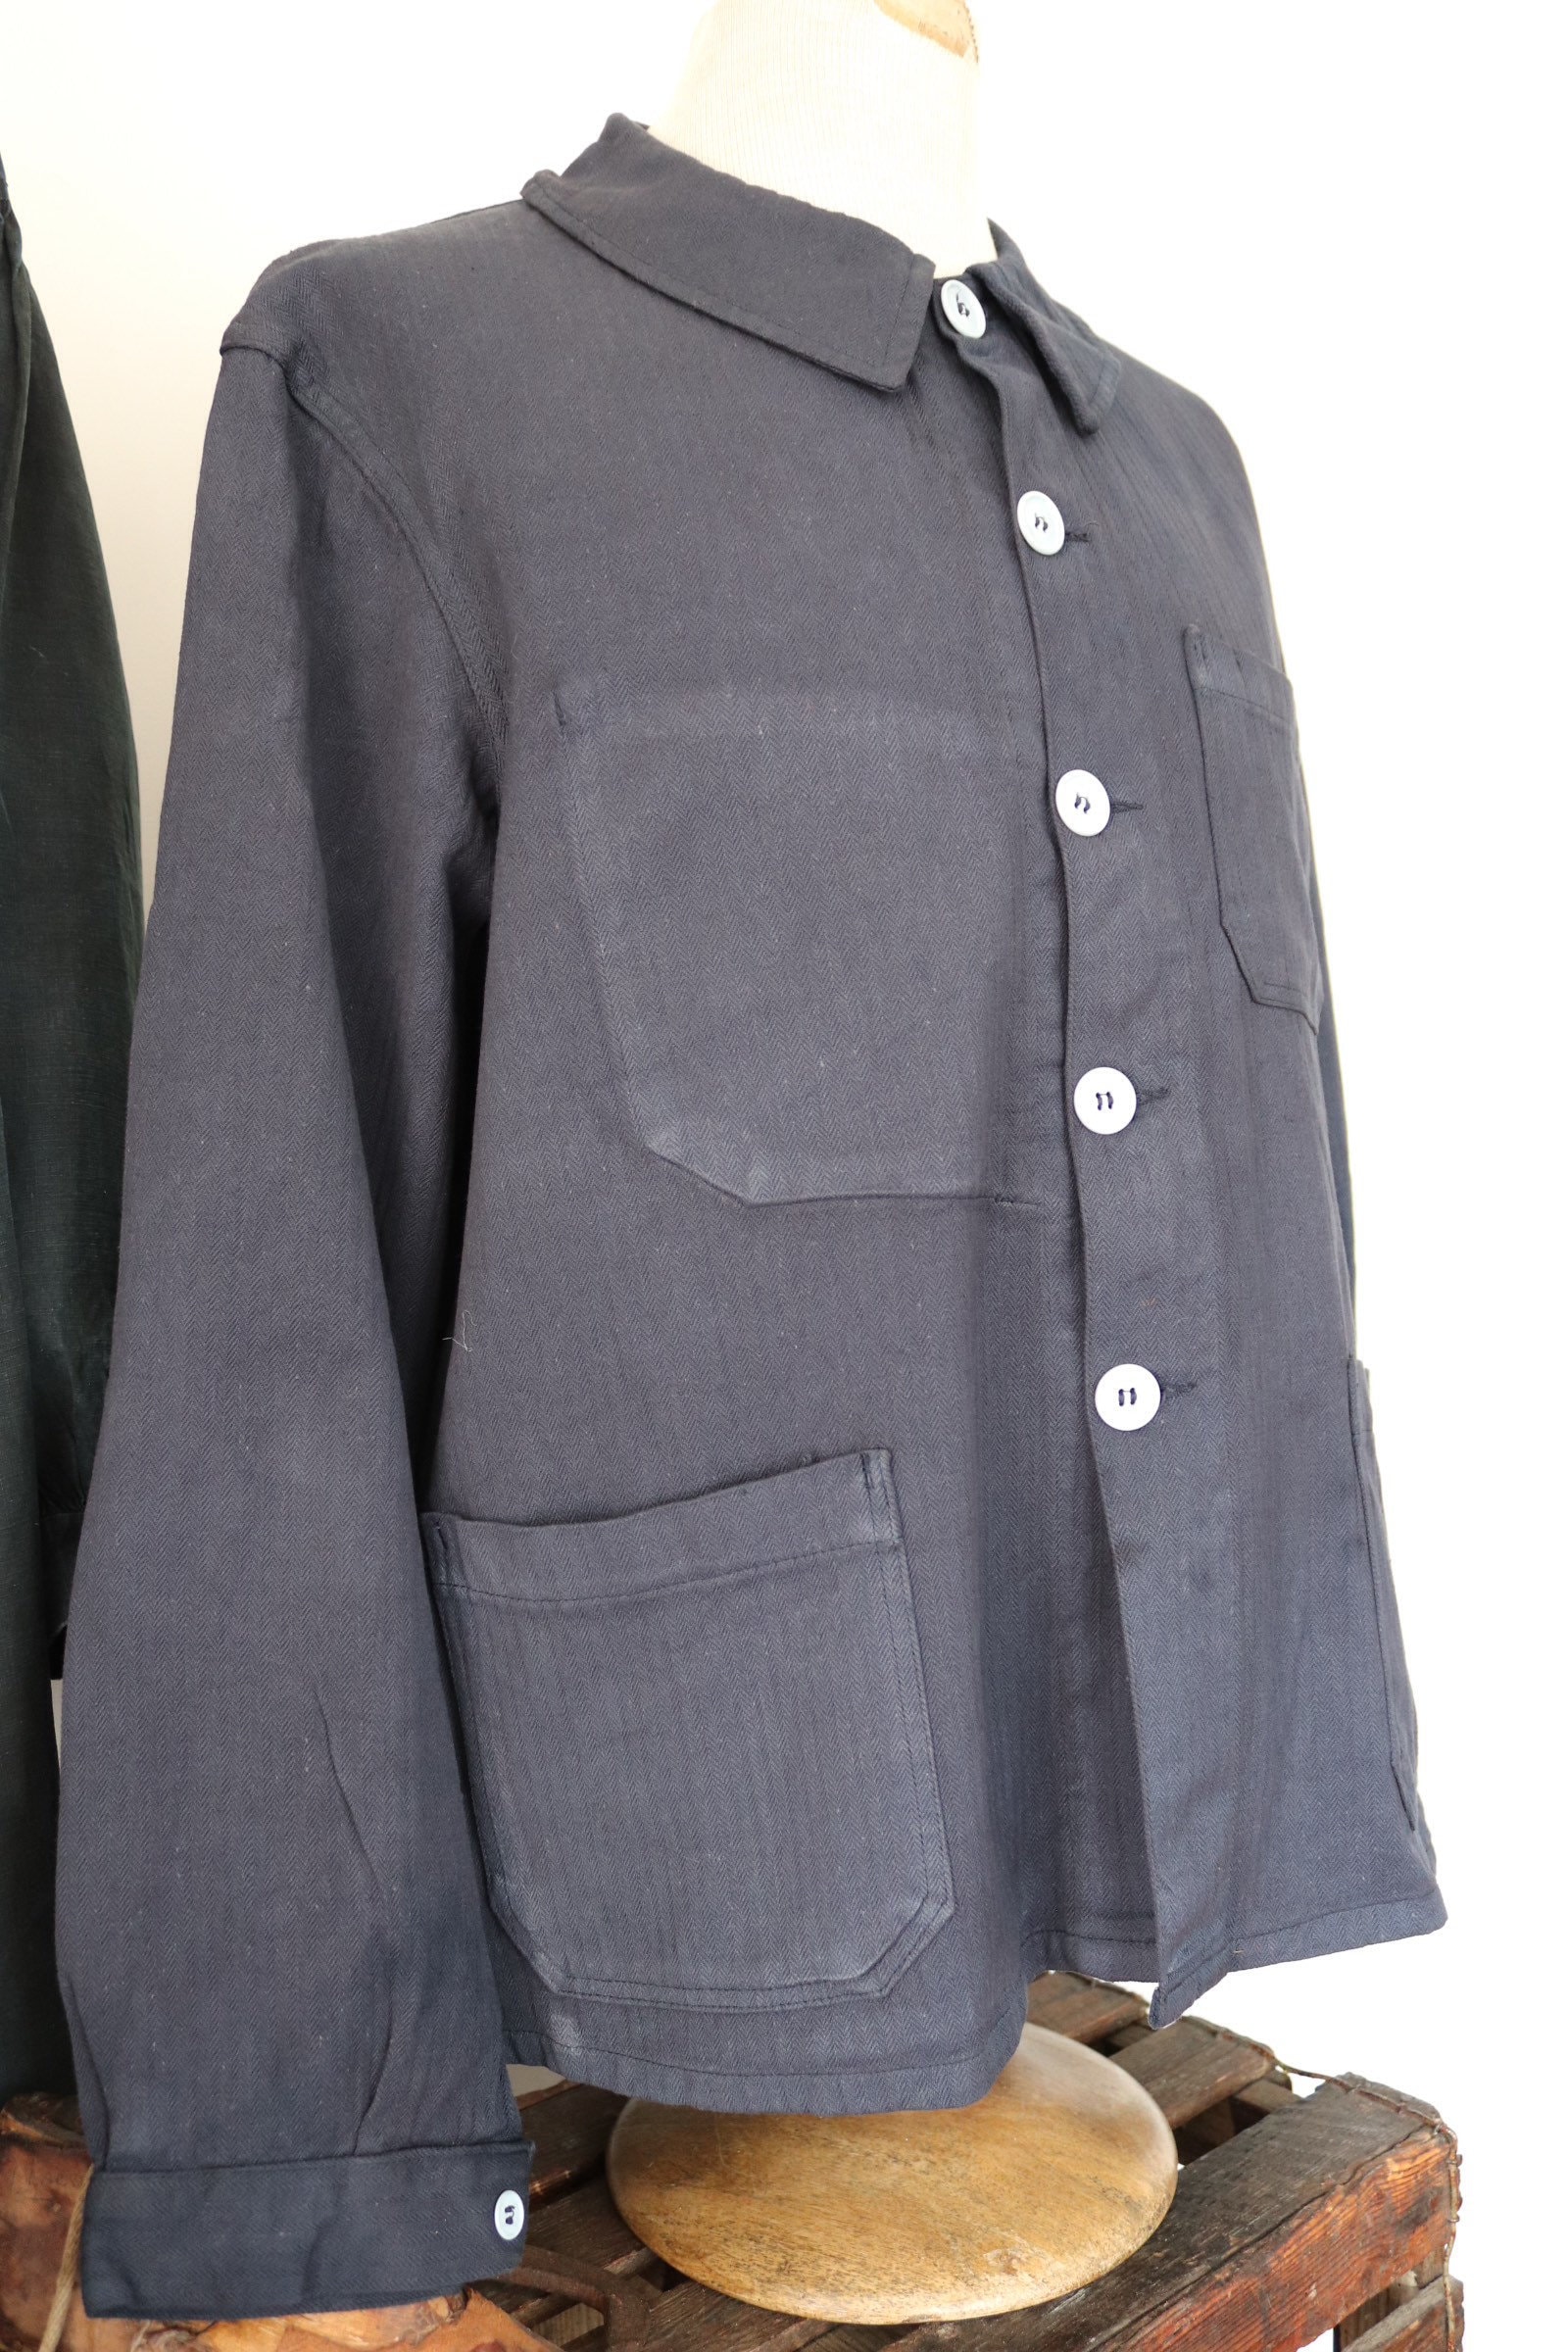 Vintage 1960s 60s deadstock french painters jacket dyed indigo blue hbt